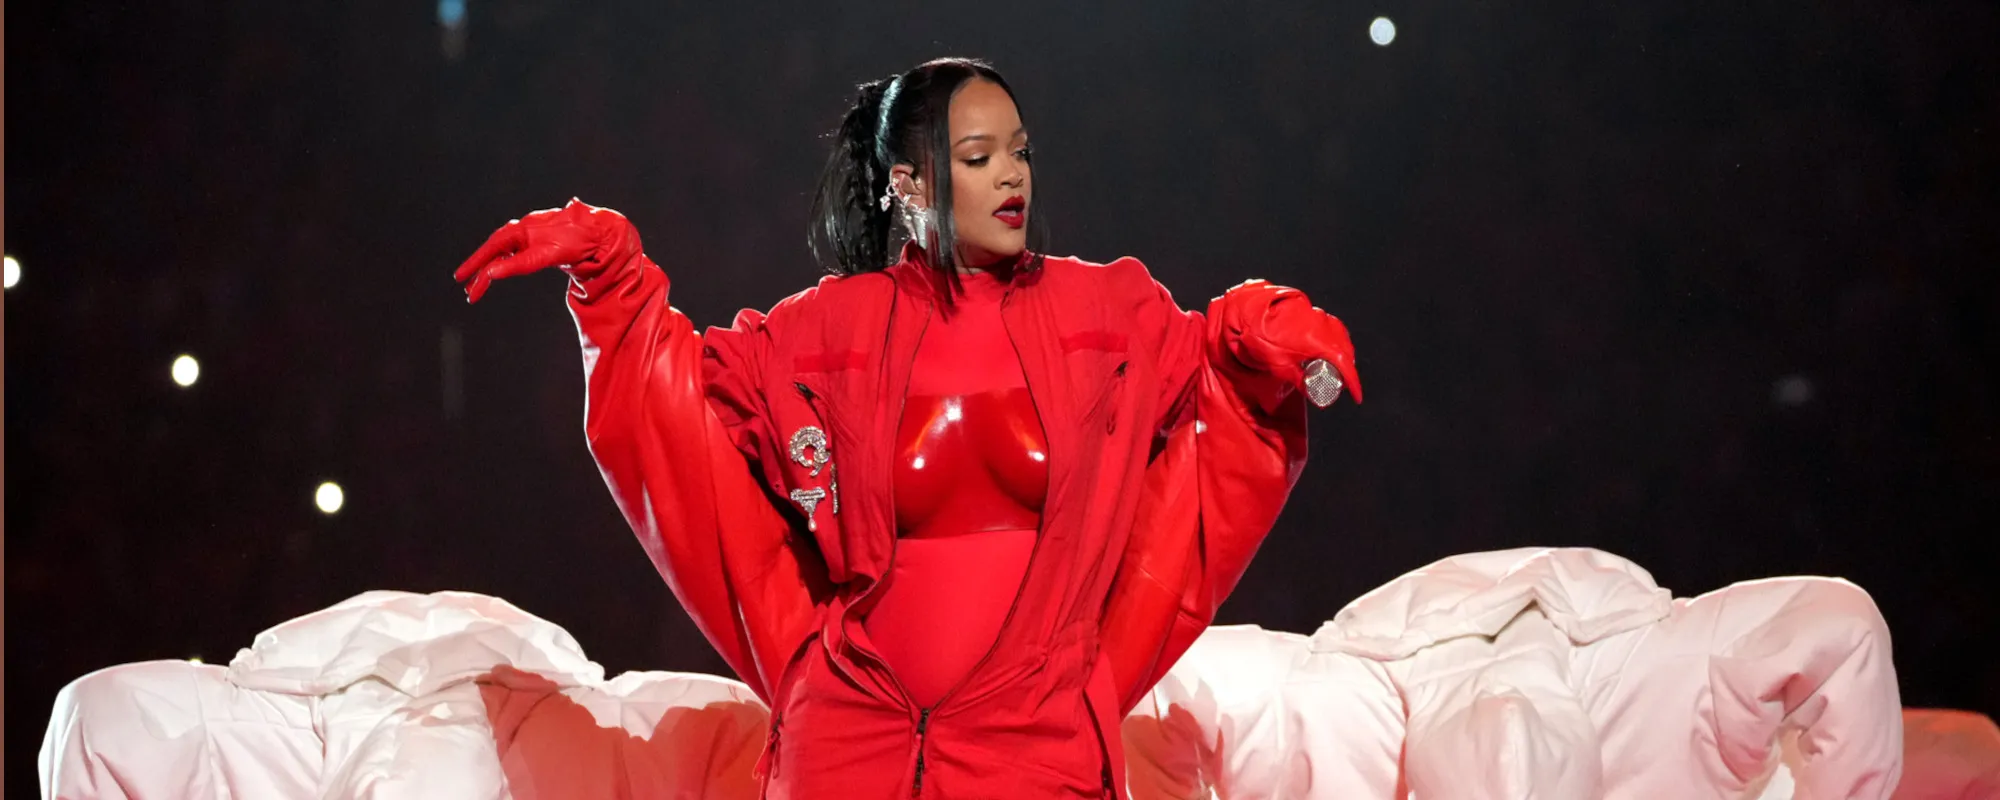 Rihanna Confirms Pregnancy After Internet Speculation Following Super Bowl Halftime Performance